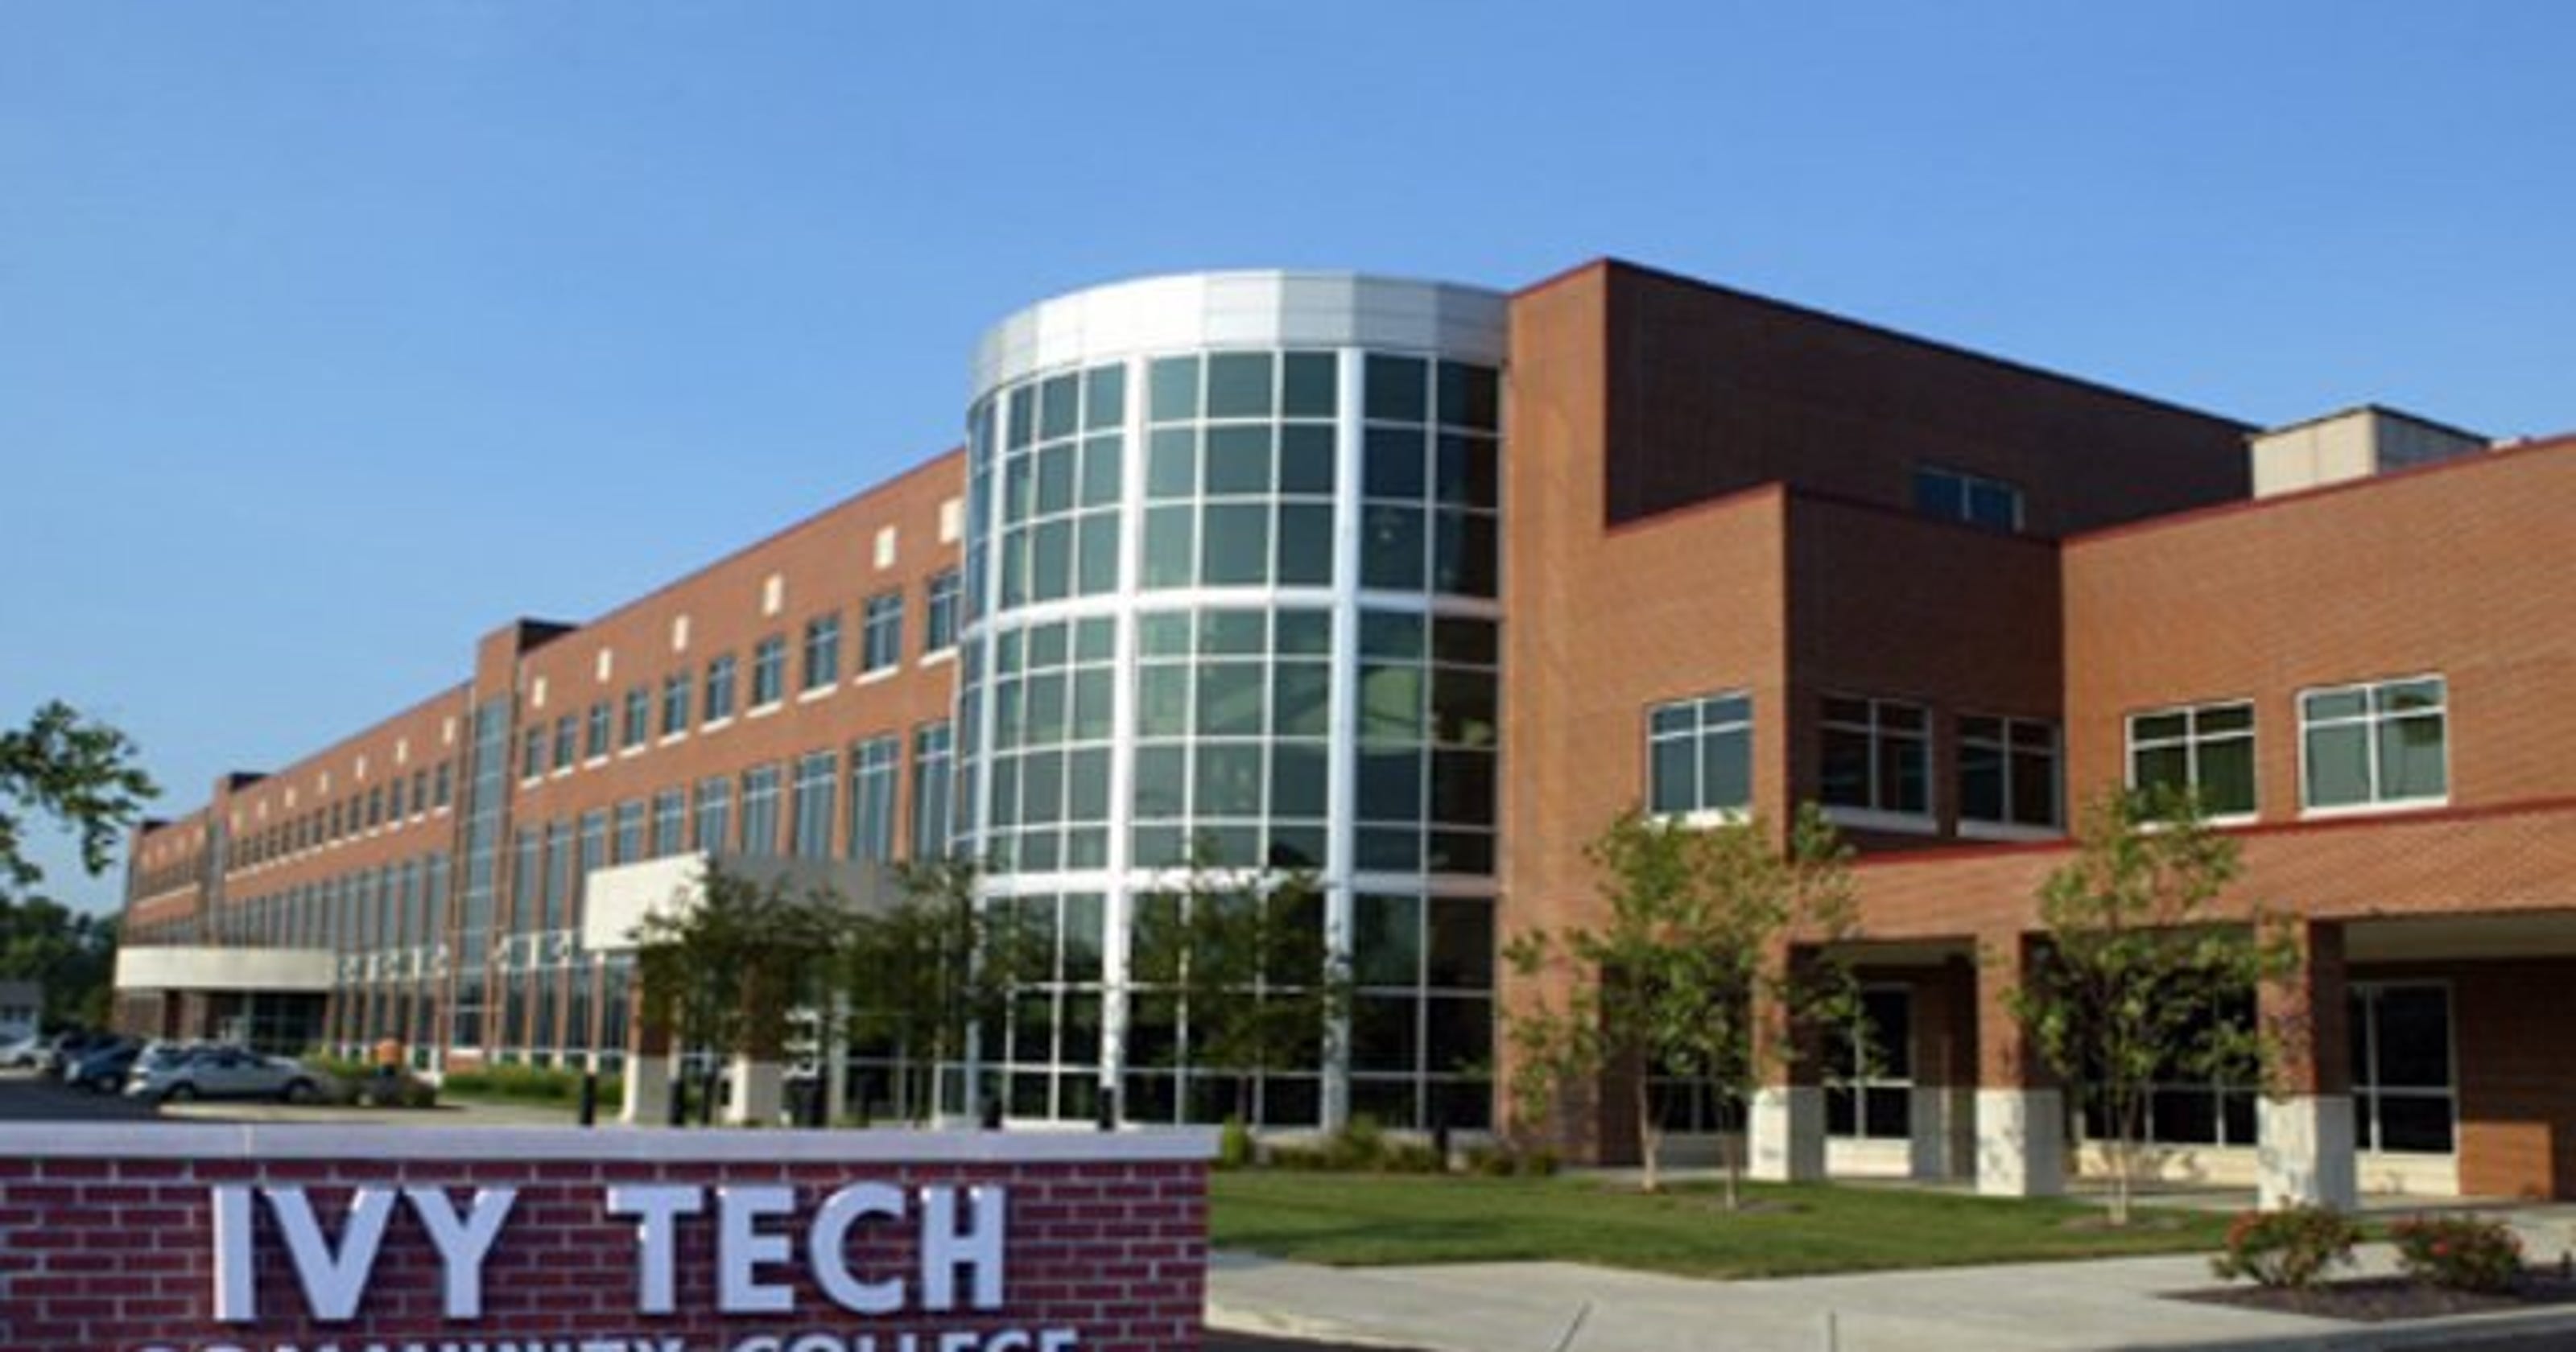 Ivy Tech fall 2018 enrollment slightly lower, expected to increase